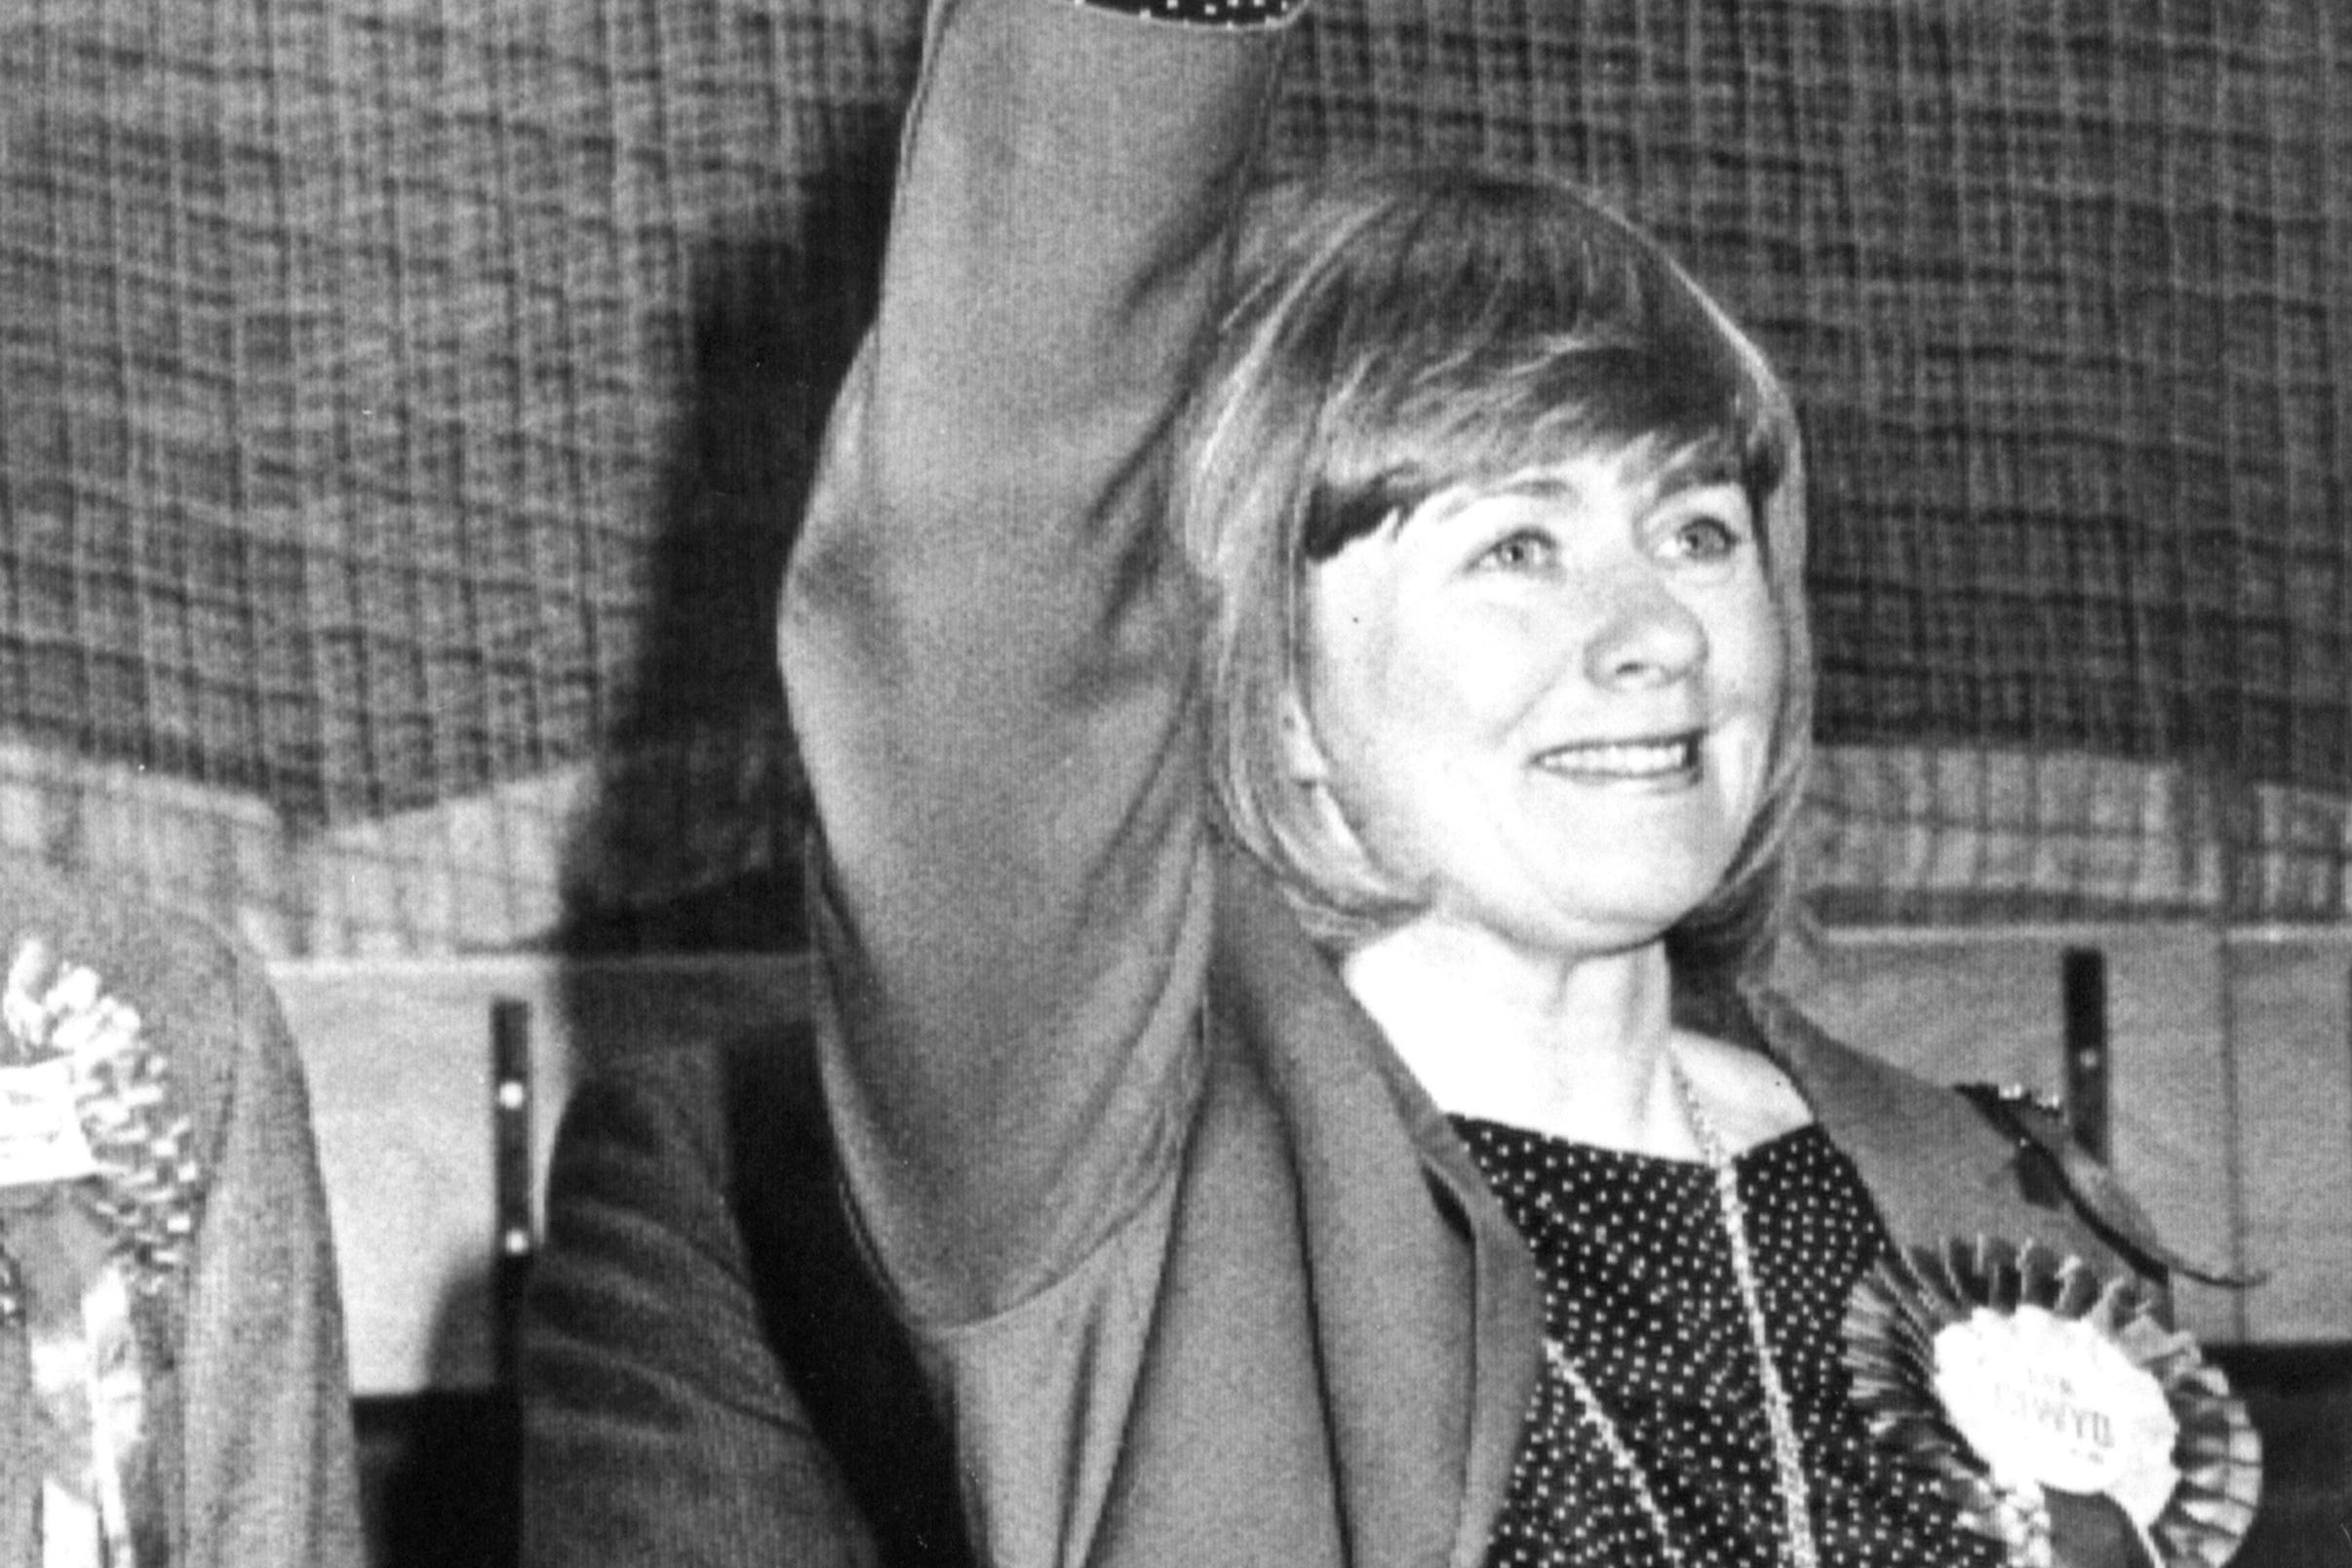 Ann Clywd was first elected as the Labour MP for Cynon Valley at a by-election in 1984